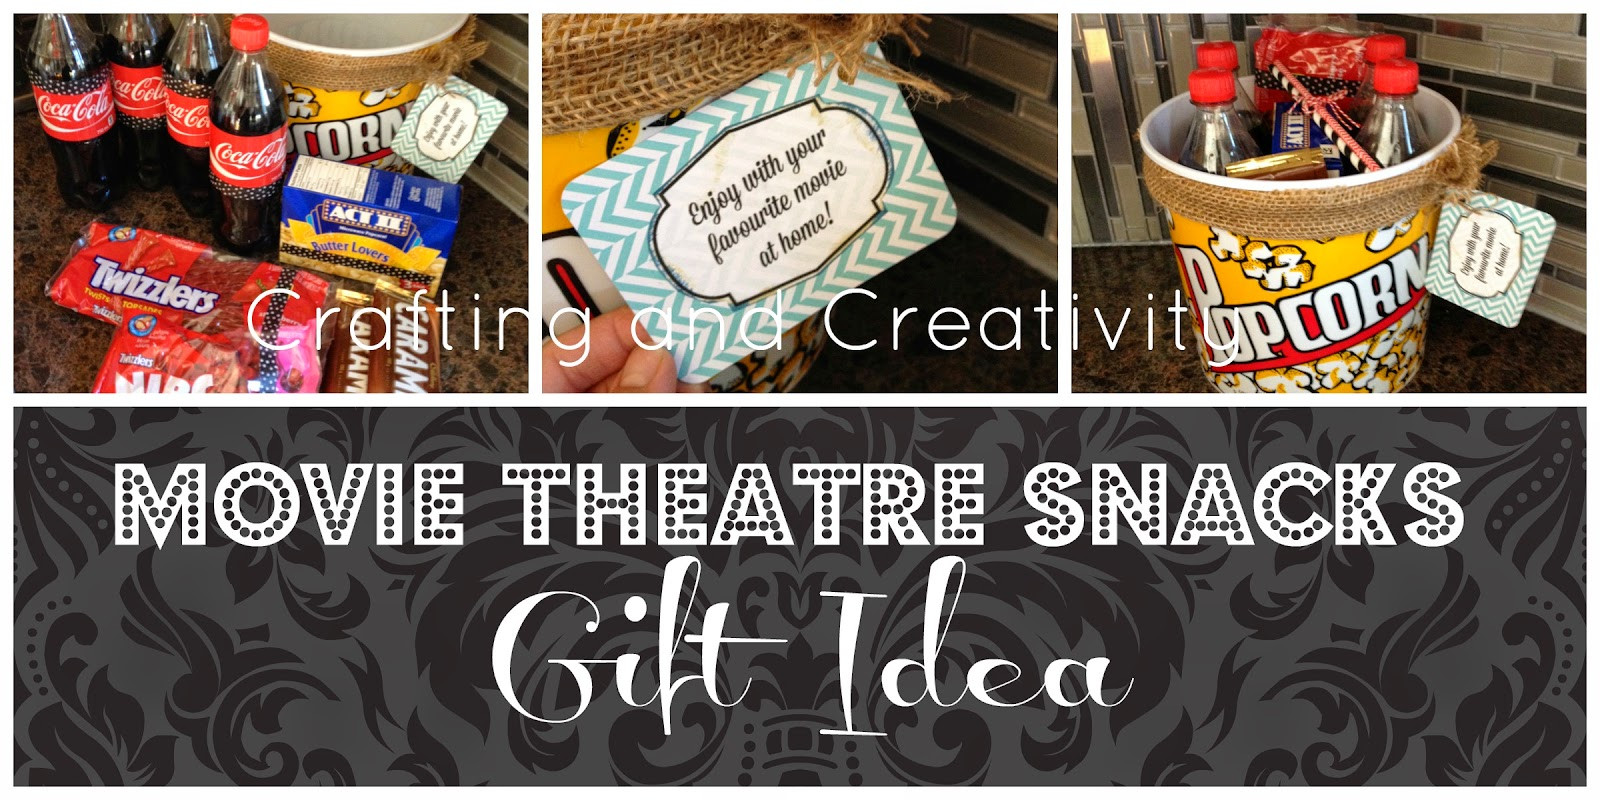 Movie Theatre Gift Basket Ideas
 Crafting and Creativity Movie Theatre Snacks Gift Idea